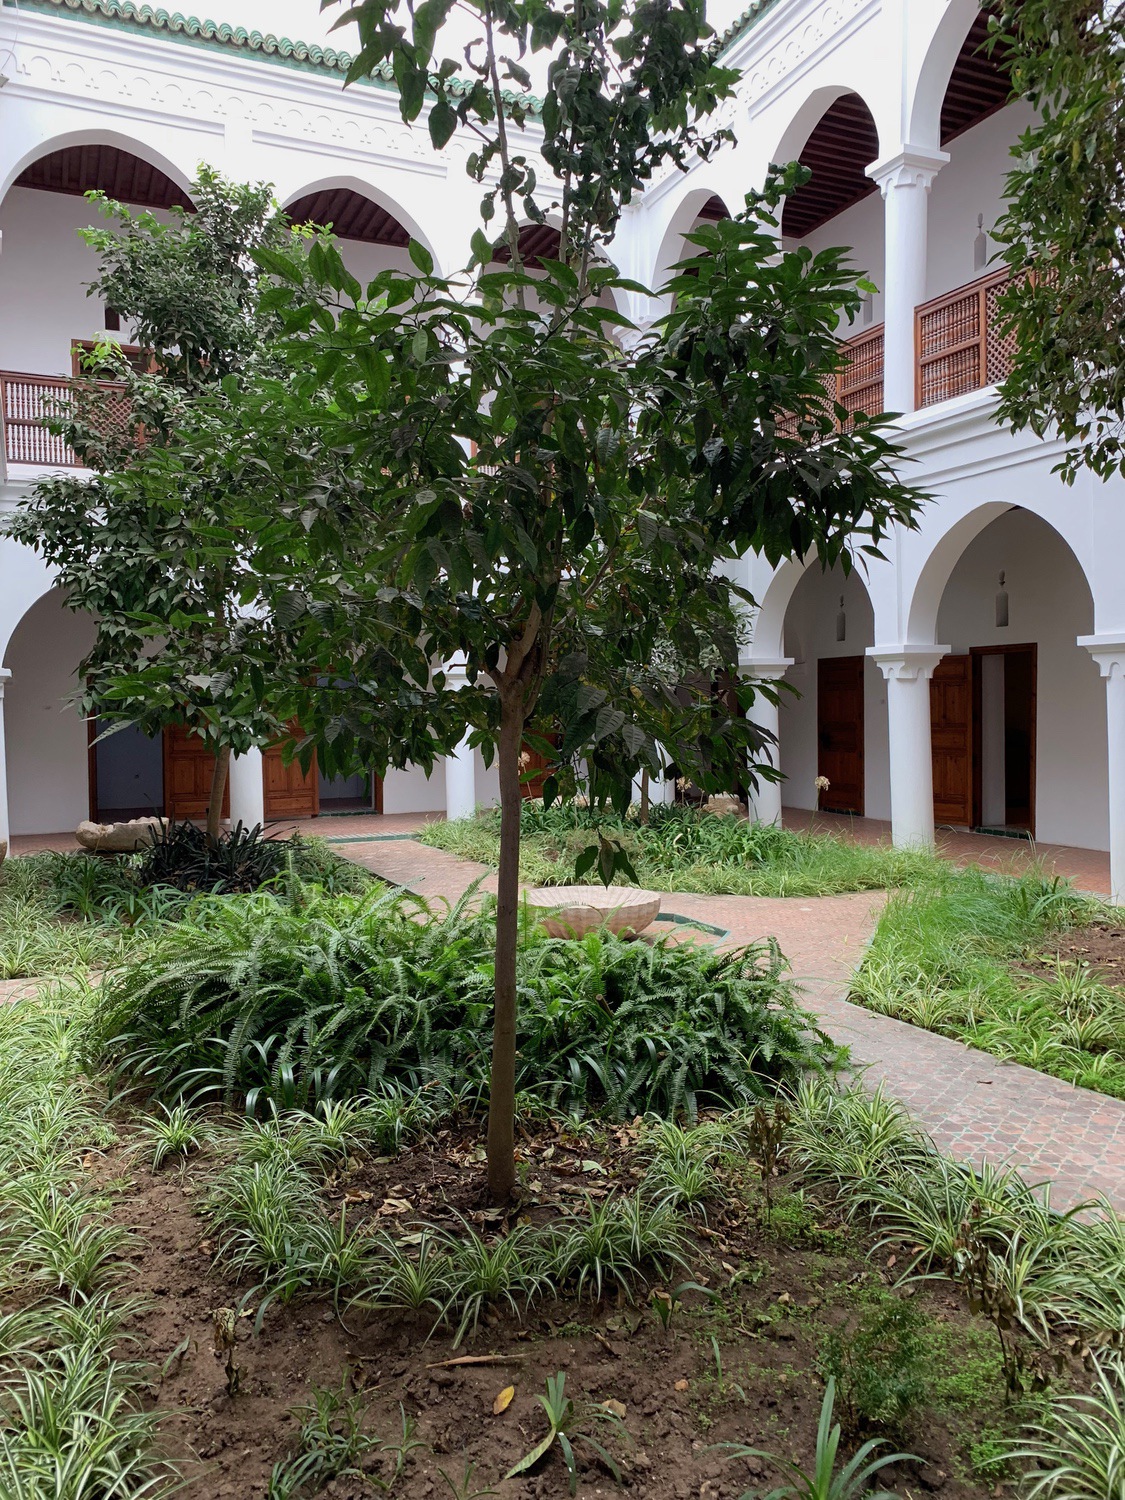 <p>View of a tree in the courtyard garden</p>